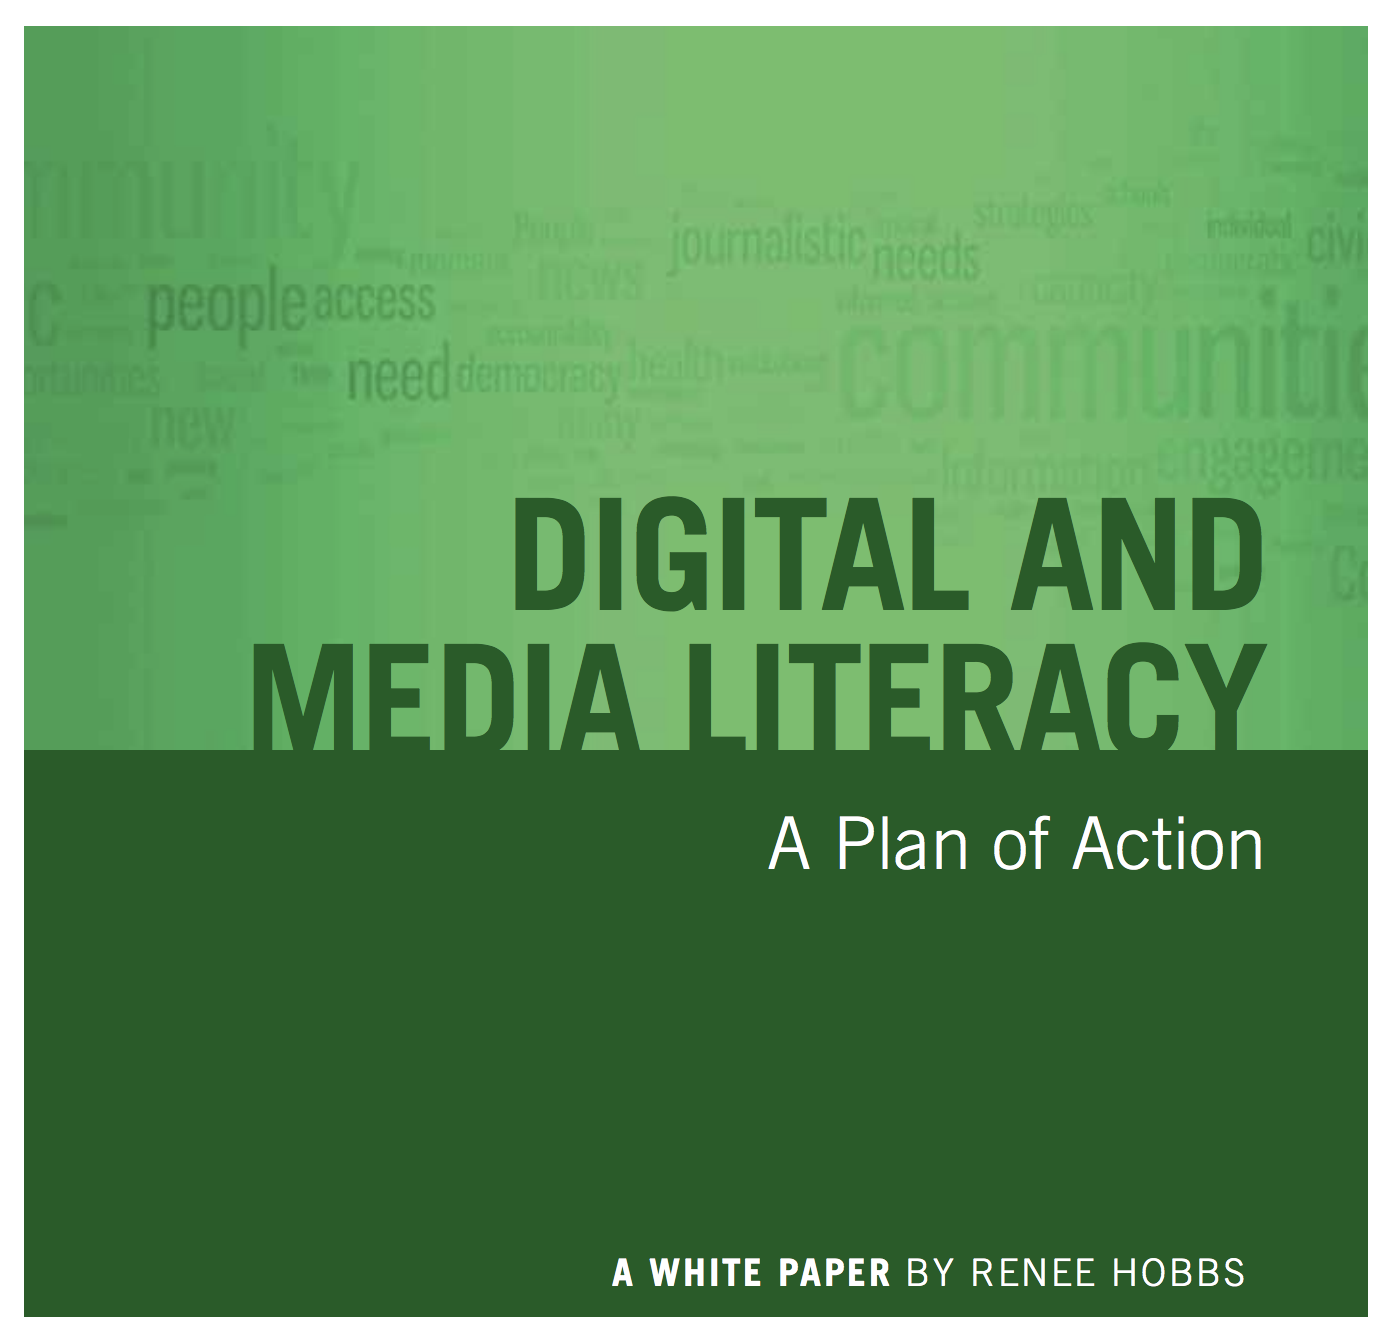 Digital and Media Literacy: A Plan of Action